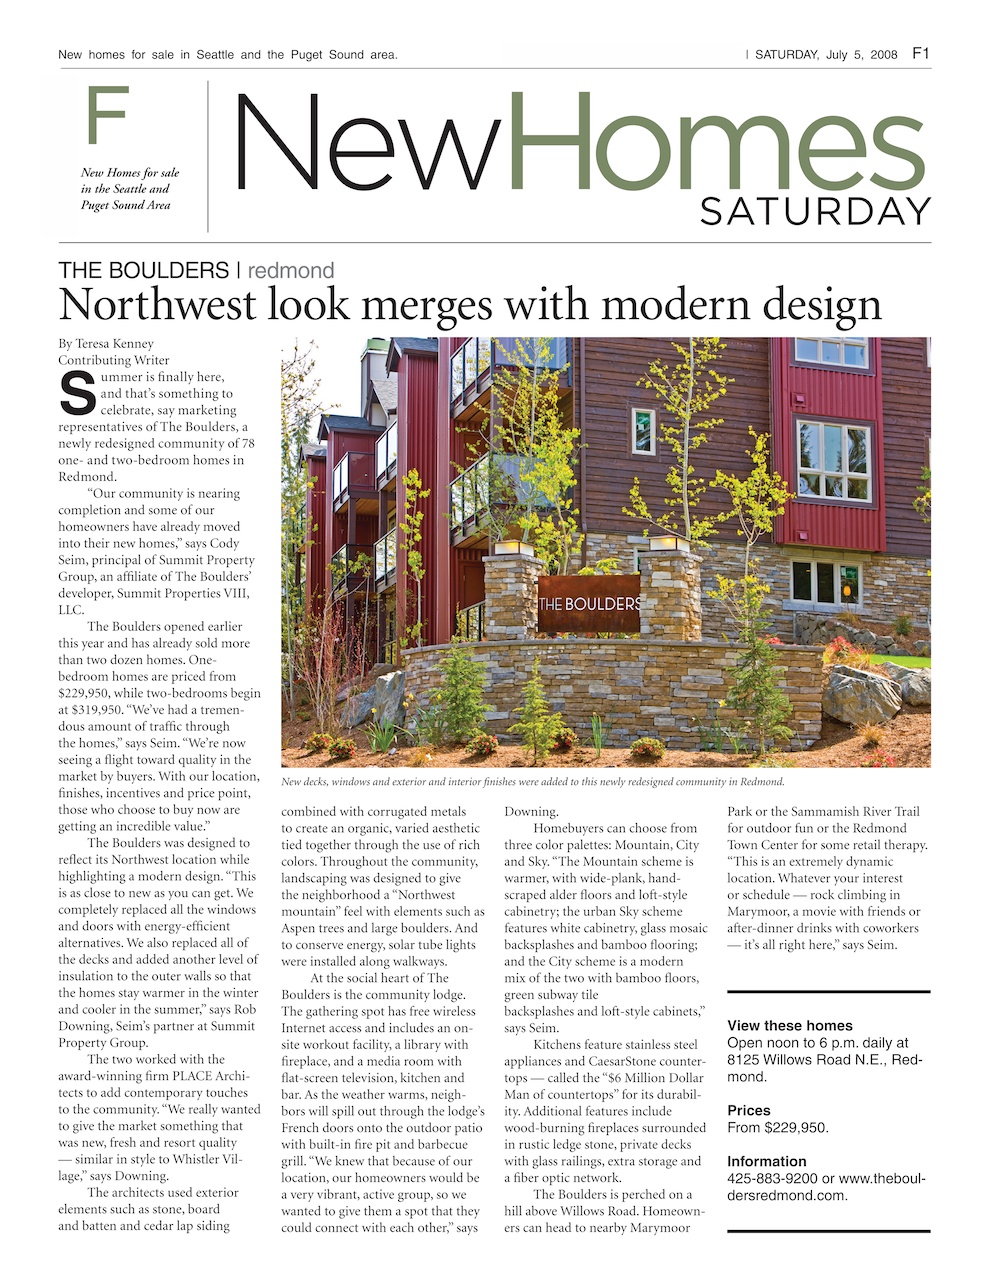 Seattle Times New Homes